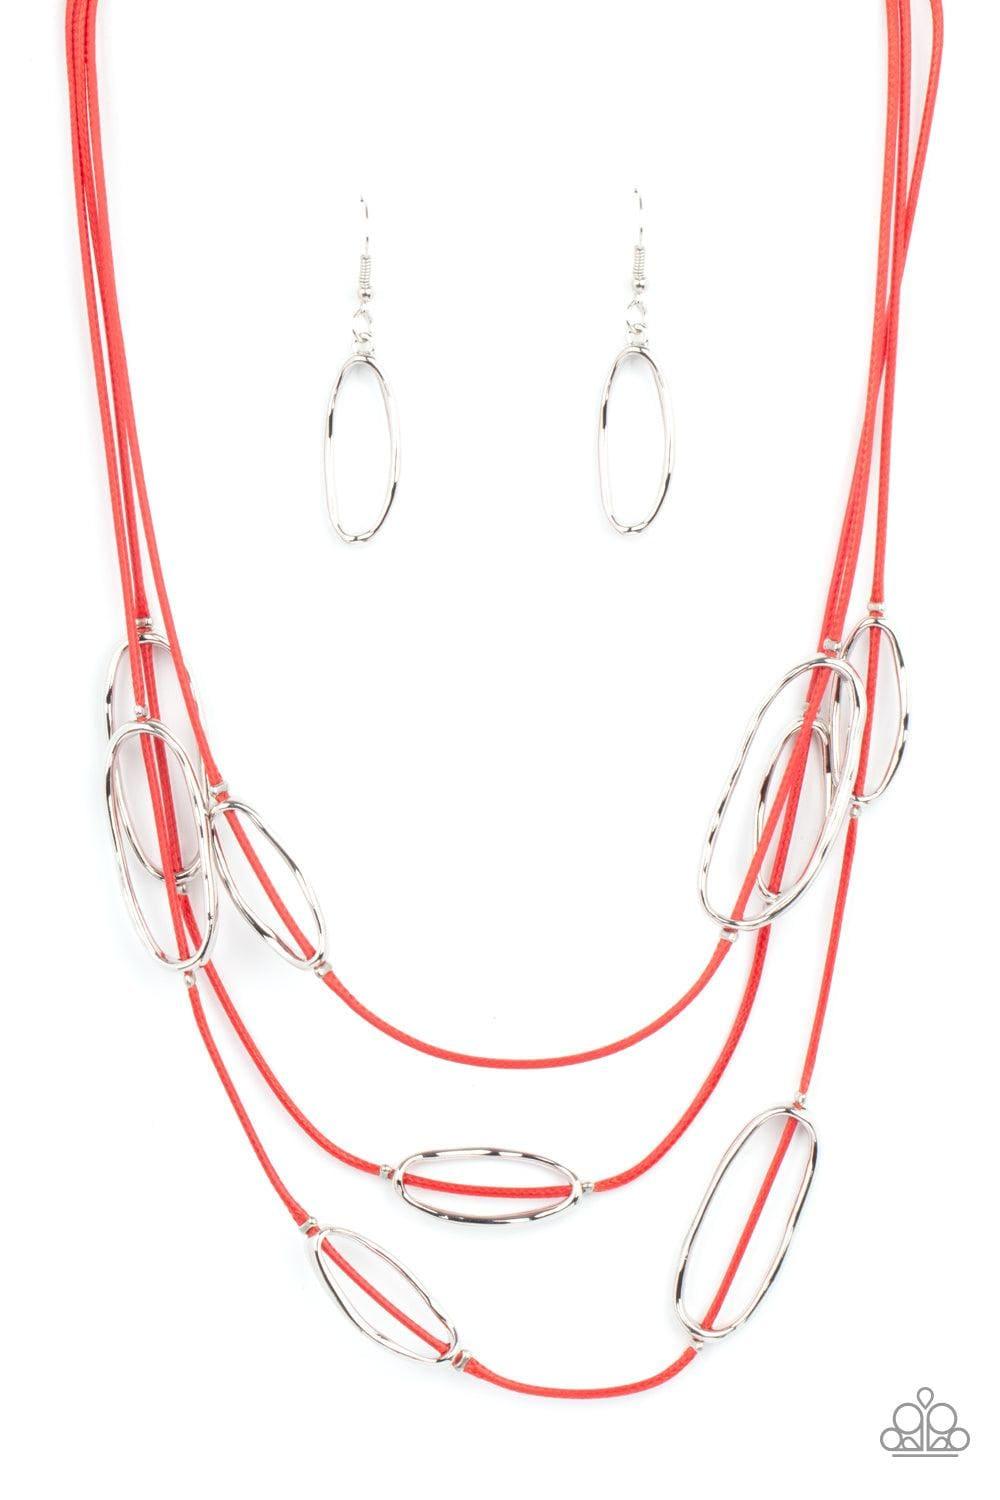 Paparazzi Accessories - Check Your Cord-inates - Red Necklace - Bling by JessieK